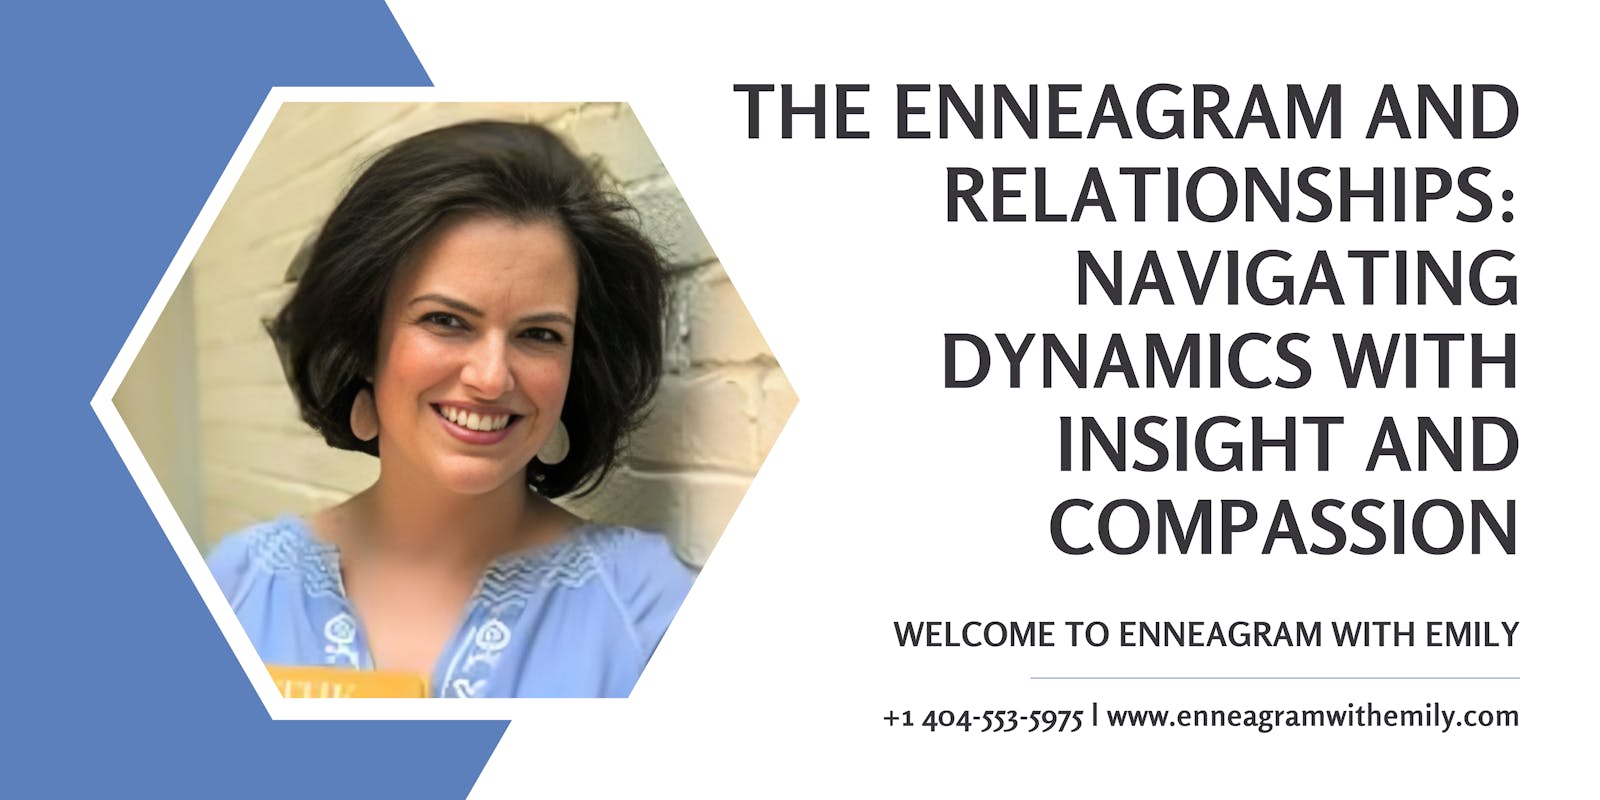 The Enneagram and Relationships: Navigating Dynamics with Insight and Compassion